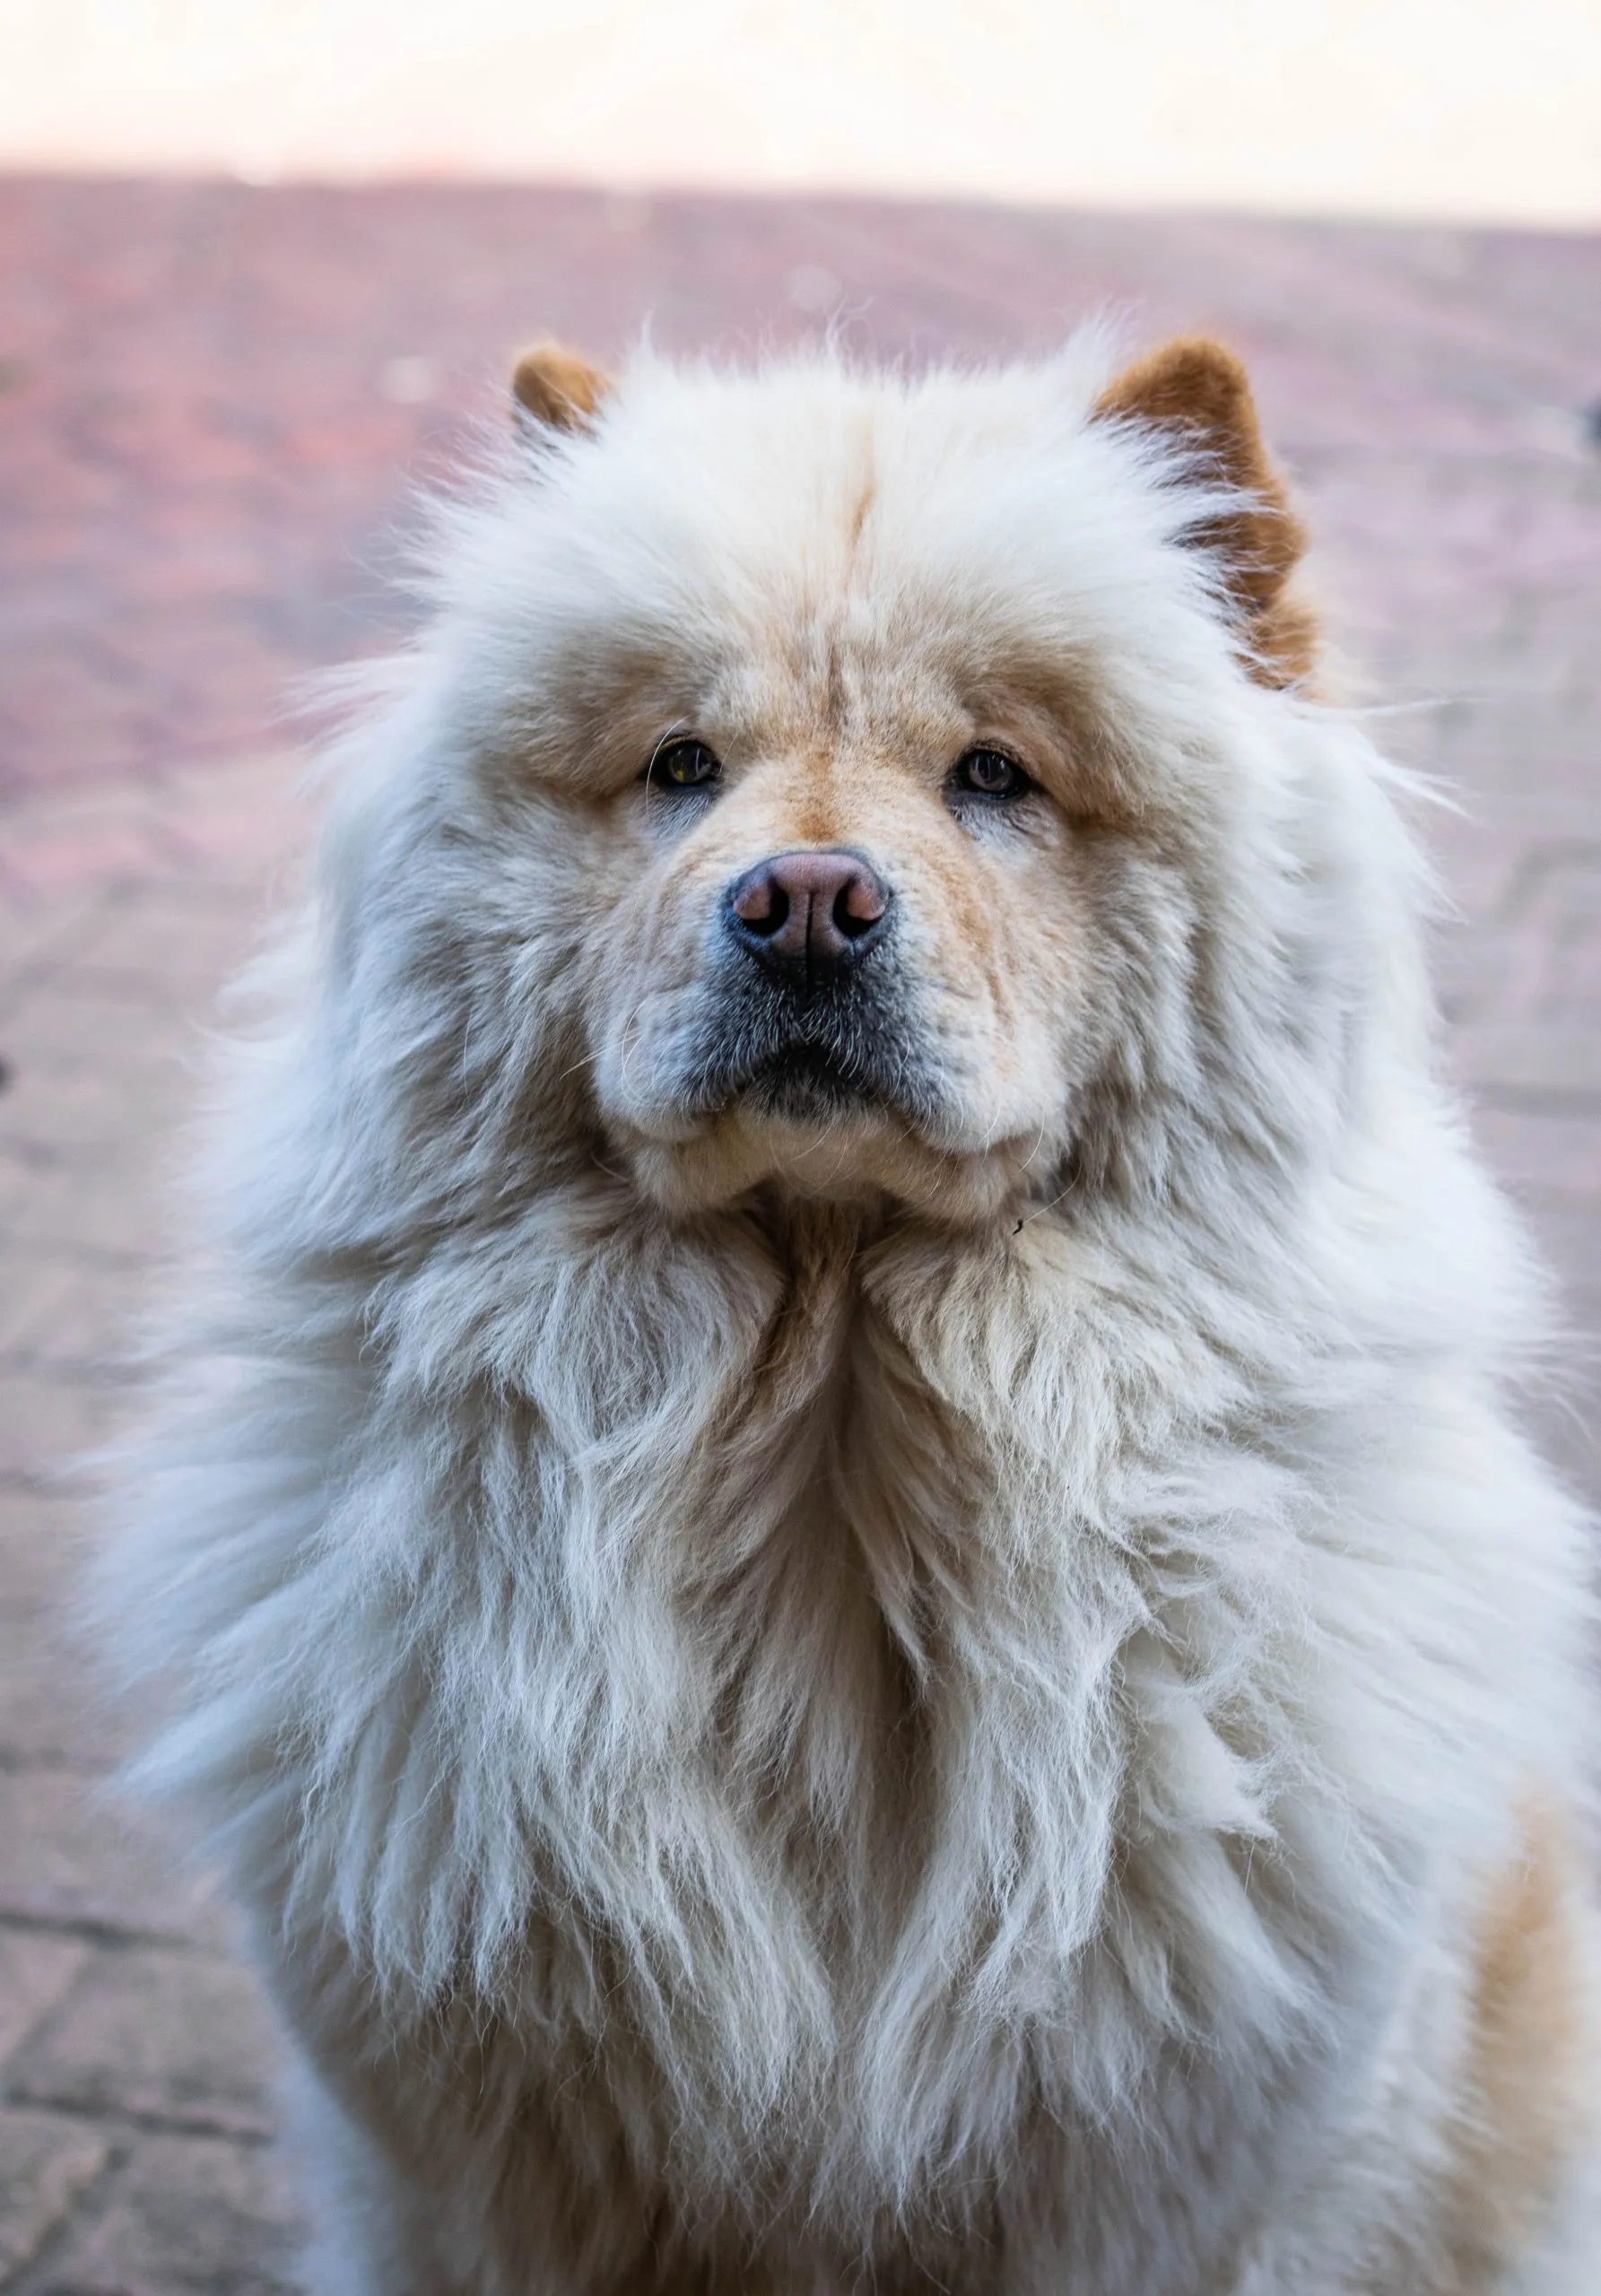 16 Dogs That Look Like Lions - Chow Chow